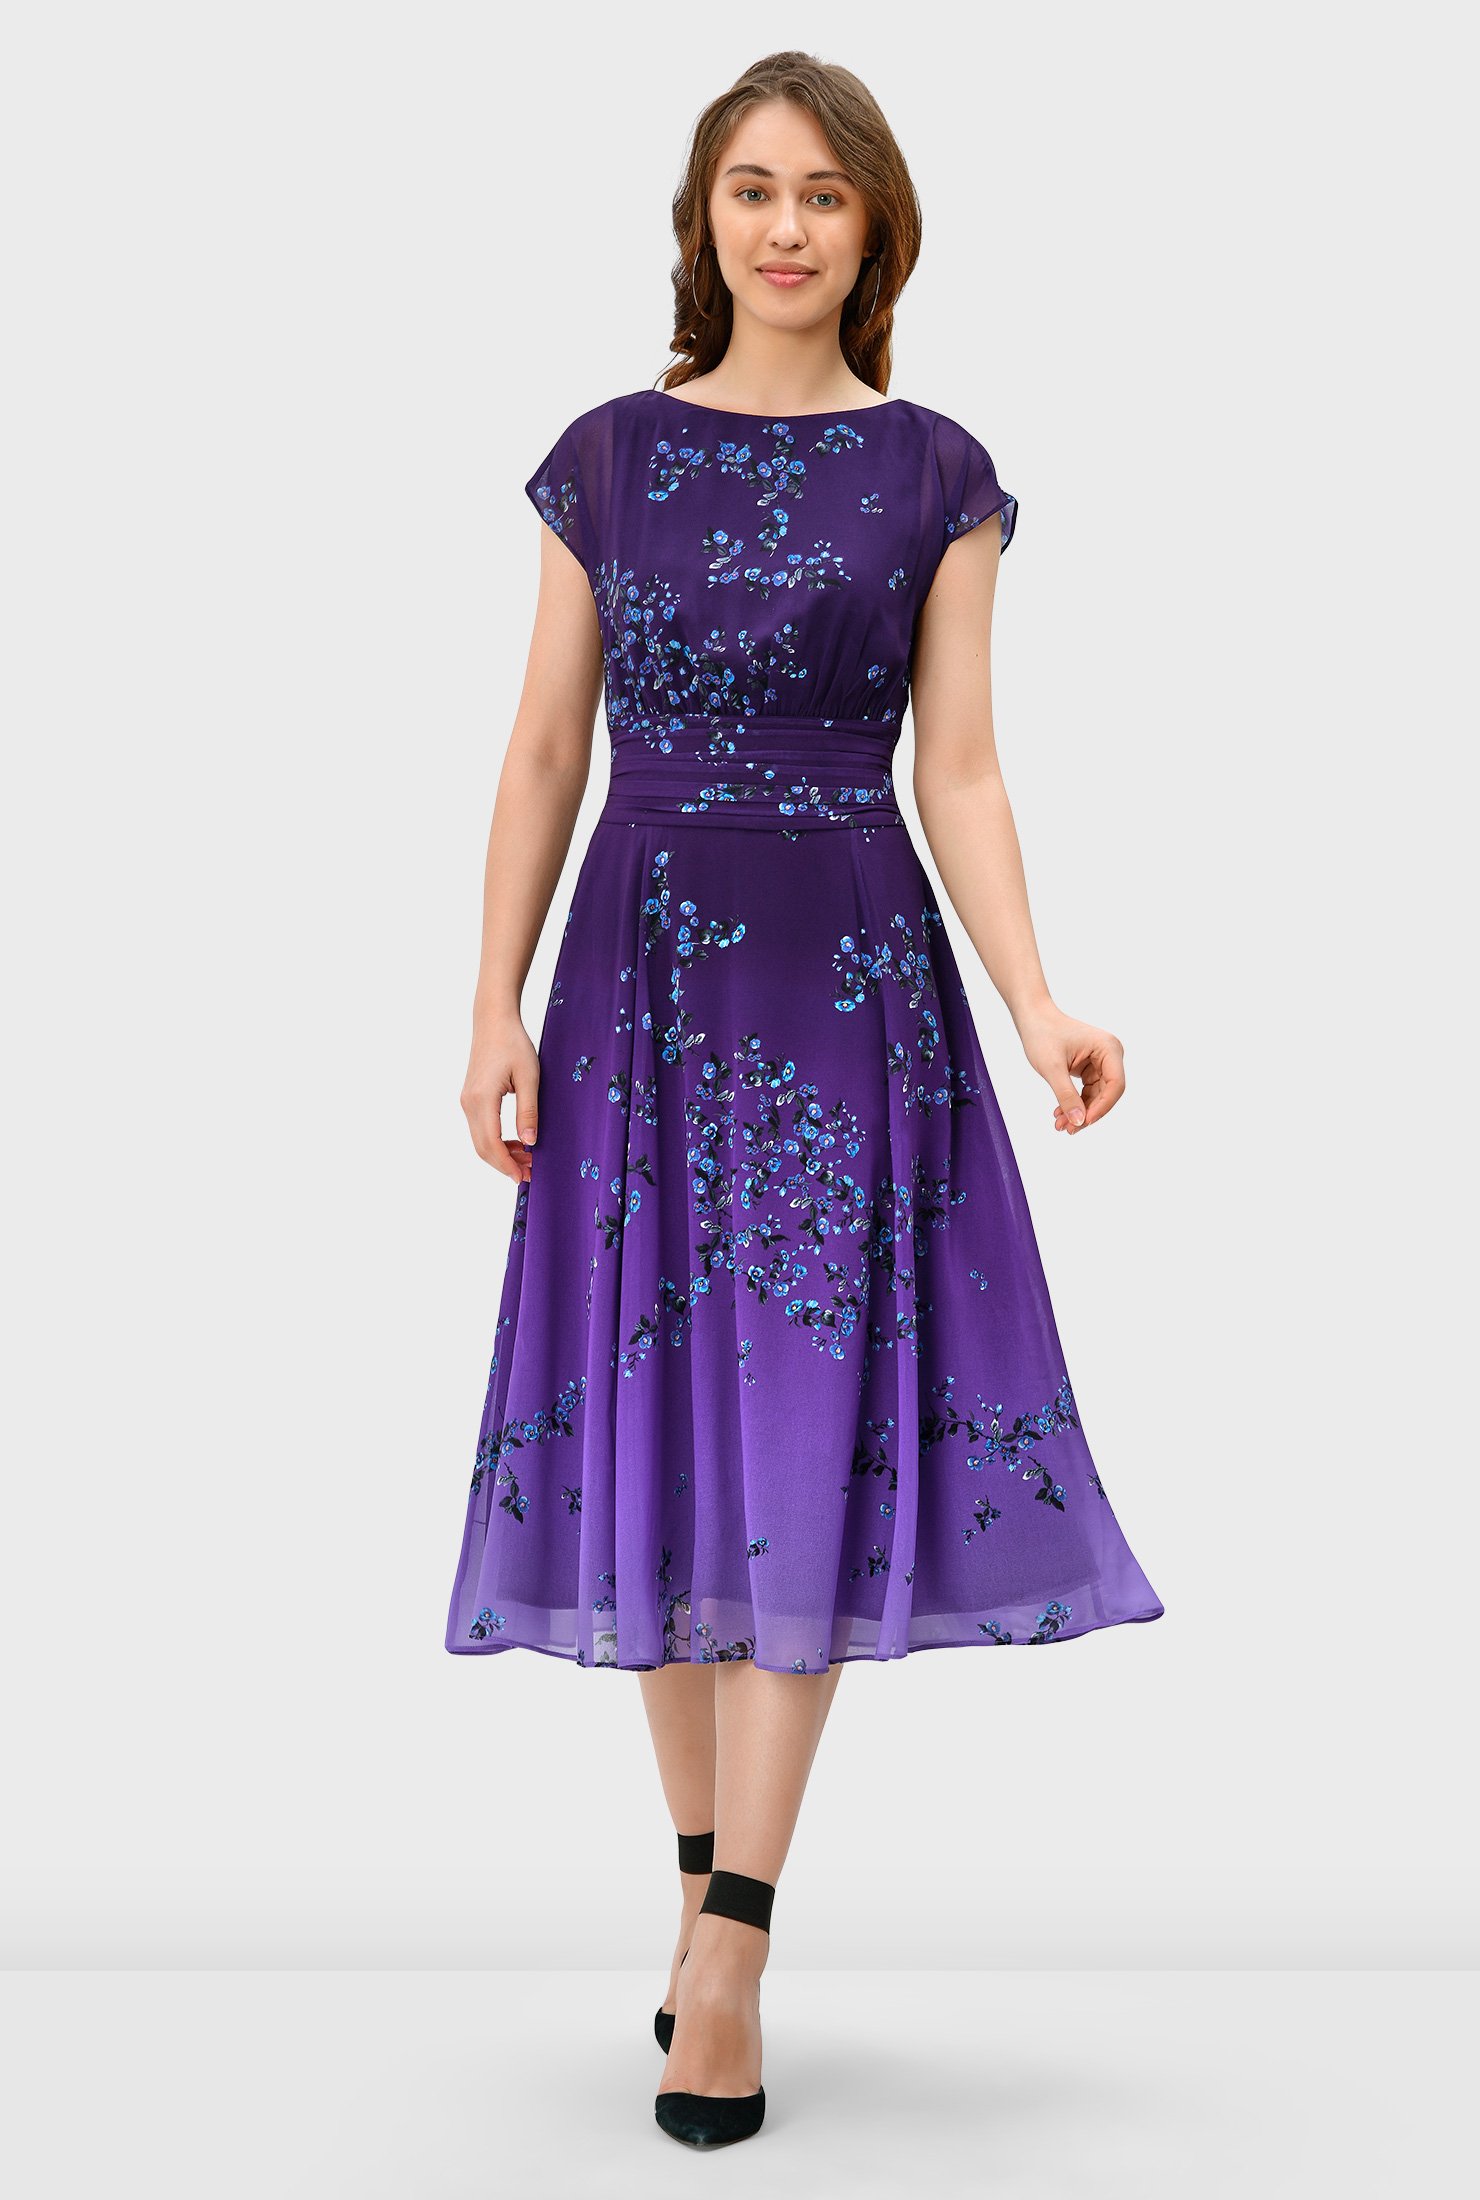 ASOS DESIGN embroidered floral midi dress with batwing sleeve in purple |  ASOS